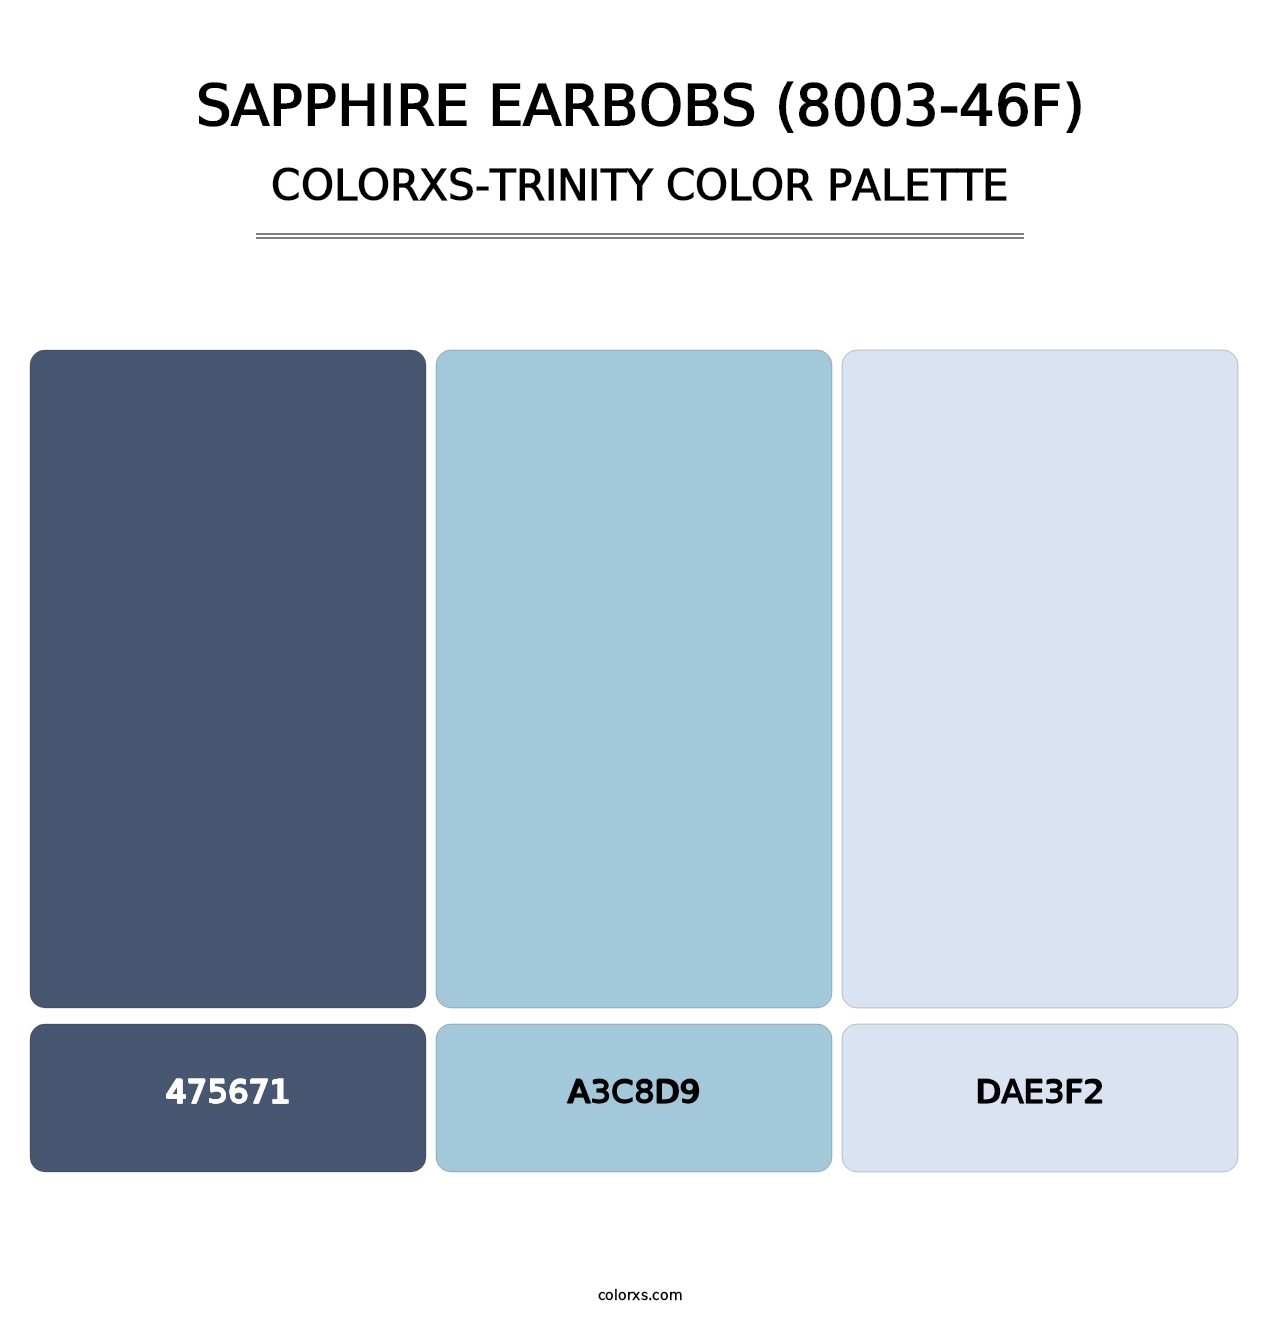 Sapphire Earbobs (8003-46F) - Colorxs Trinity Palette